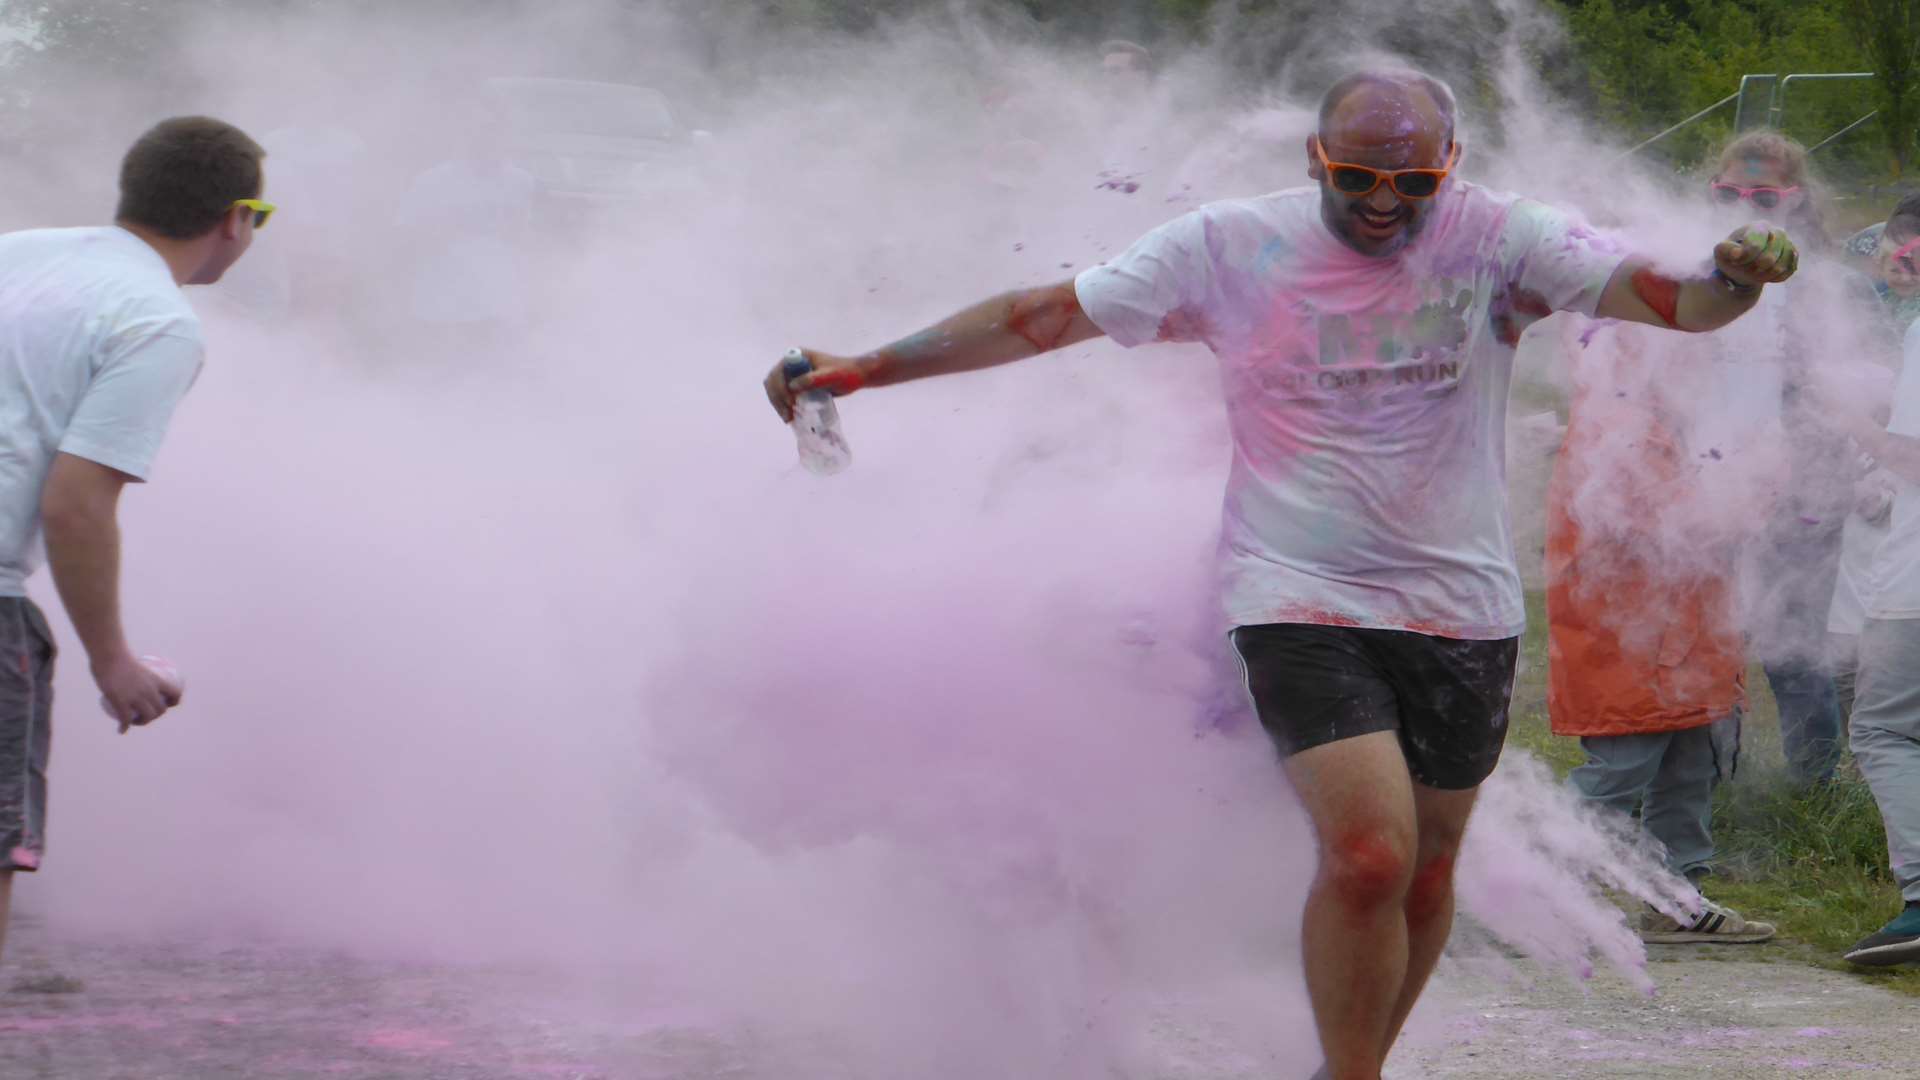 KM Charity of the Year winners will enjoy the benefits of wide exposure across the KM Group's multimedia output, including collaborative events with the KM Charity Team such as the KM Colour Run.